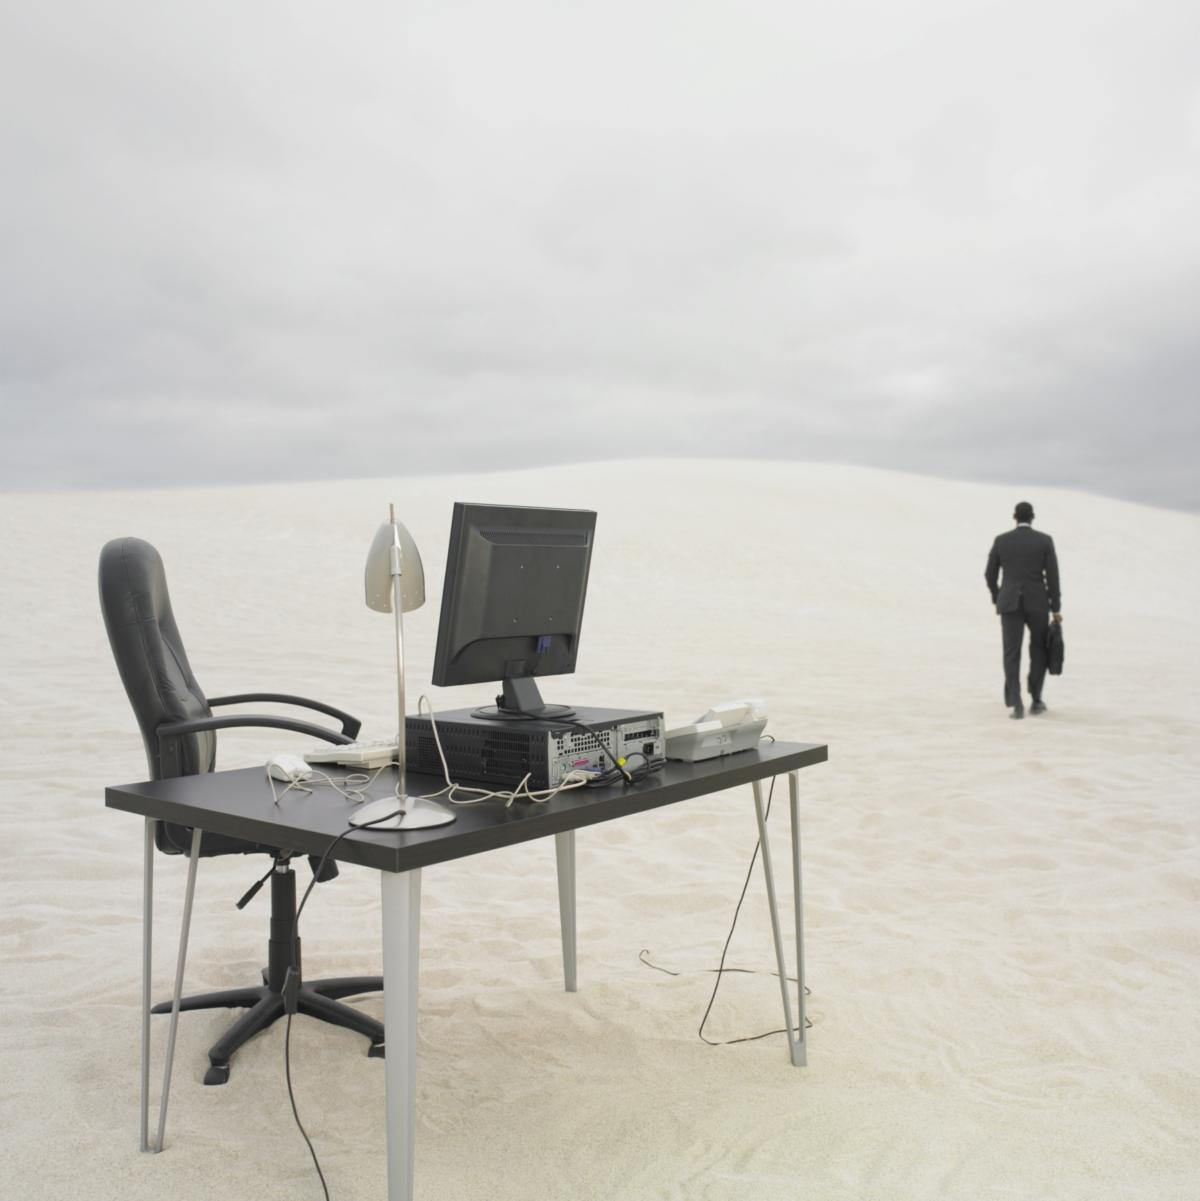 remote workers larger talent pool